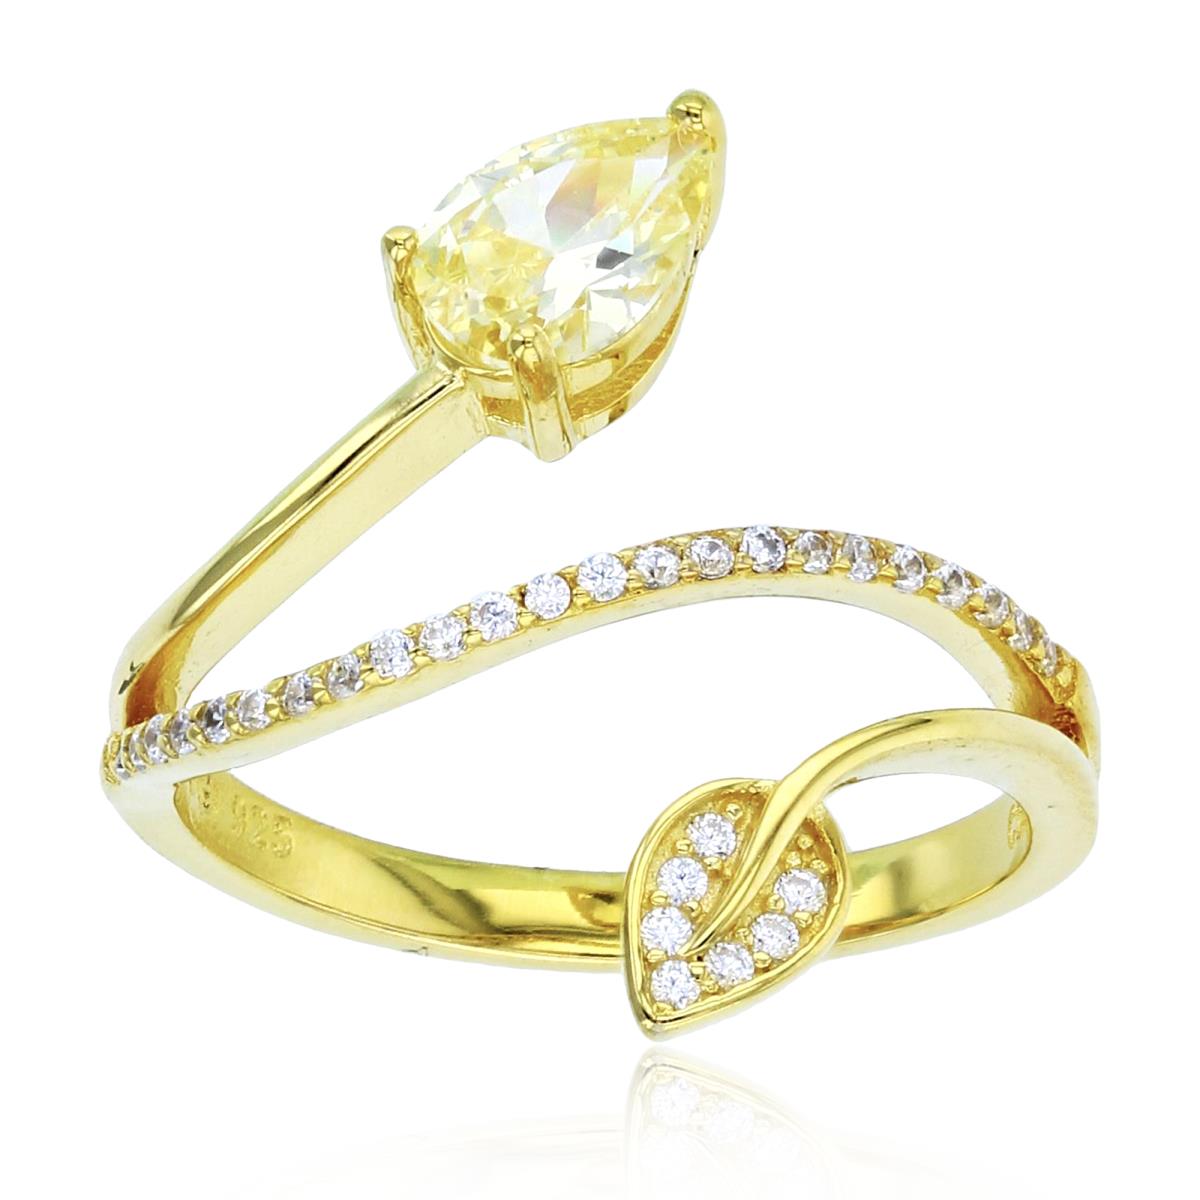 Sterling Silver+1Micron Yellow Gold 7x5mm PS Canary Yellow & Rnd White CZ Leaves Open Rows Ring